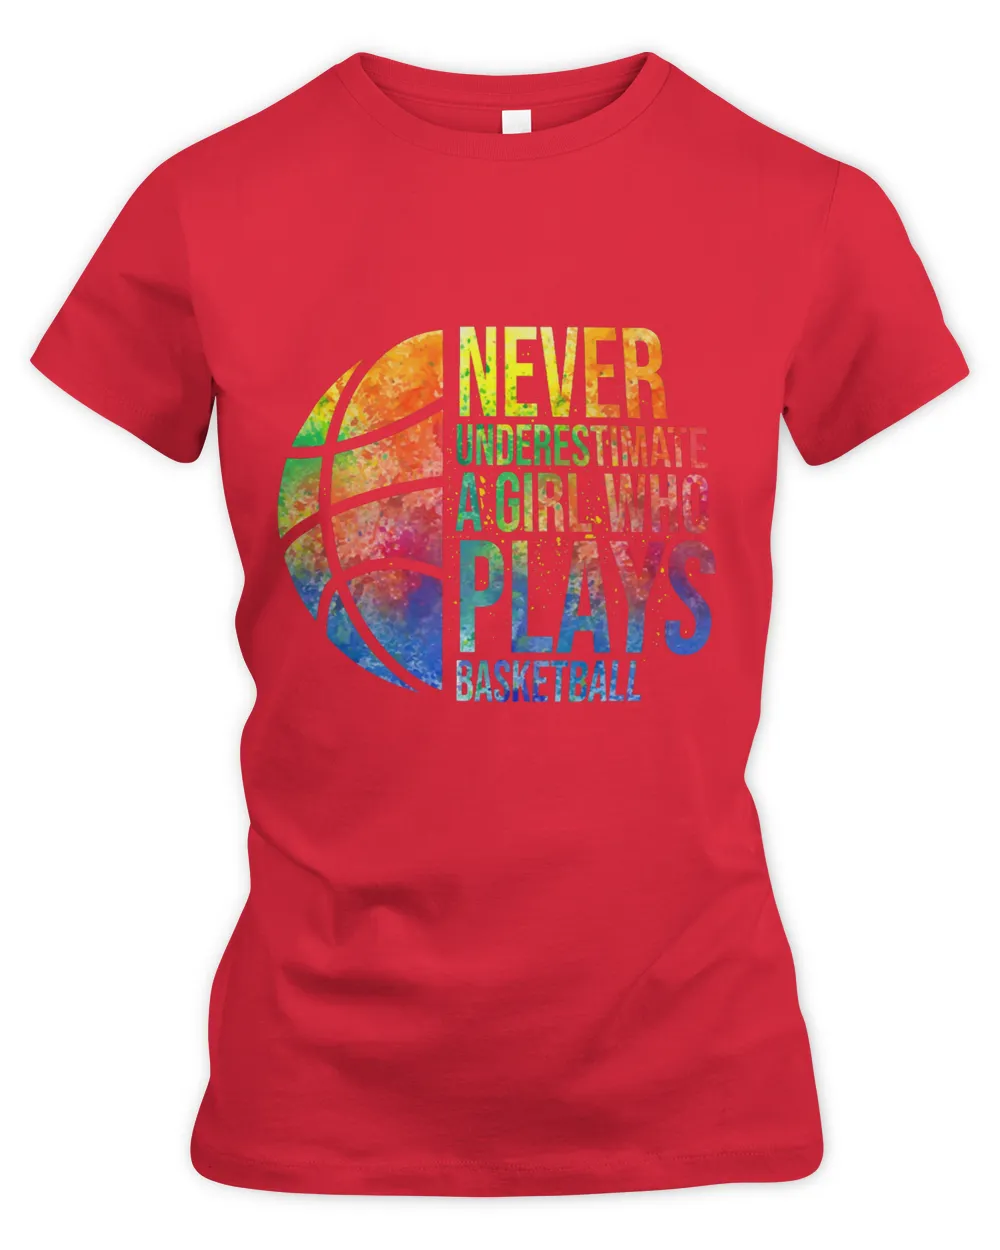 Basketball Gift Hoops Girls Never Underestimate A Girl Who Plays